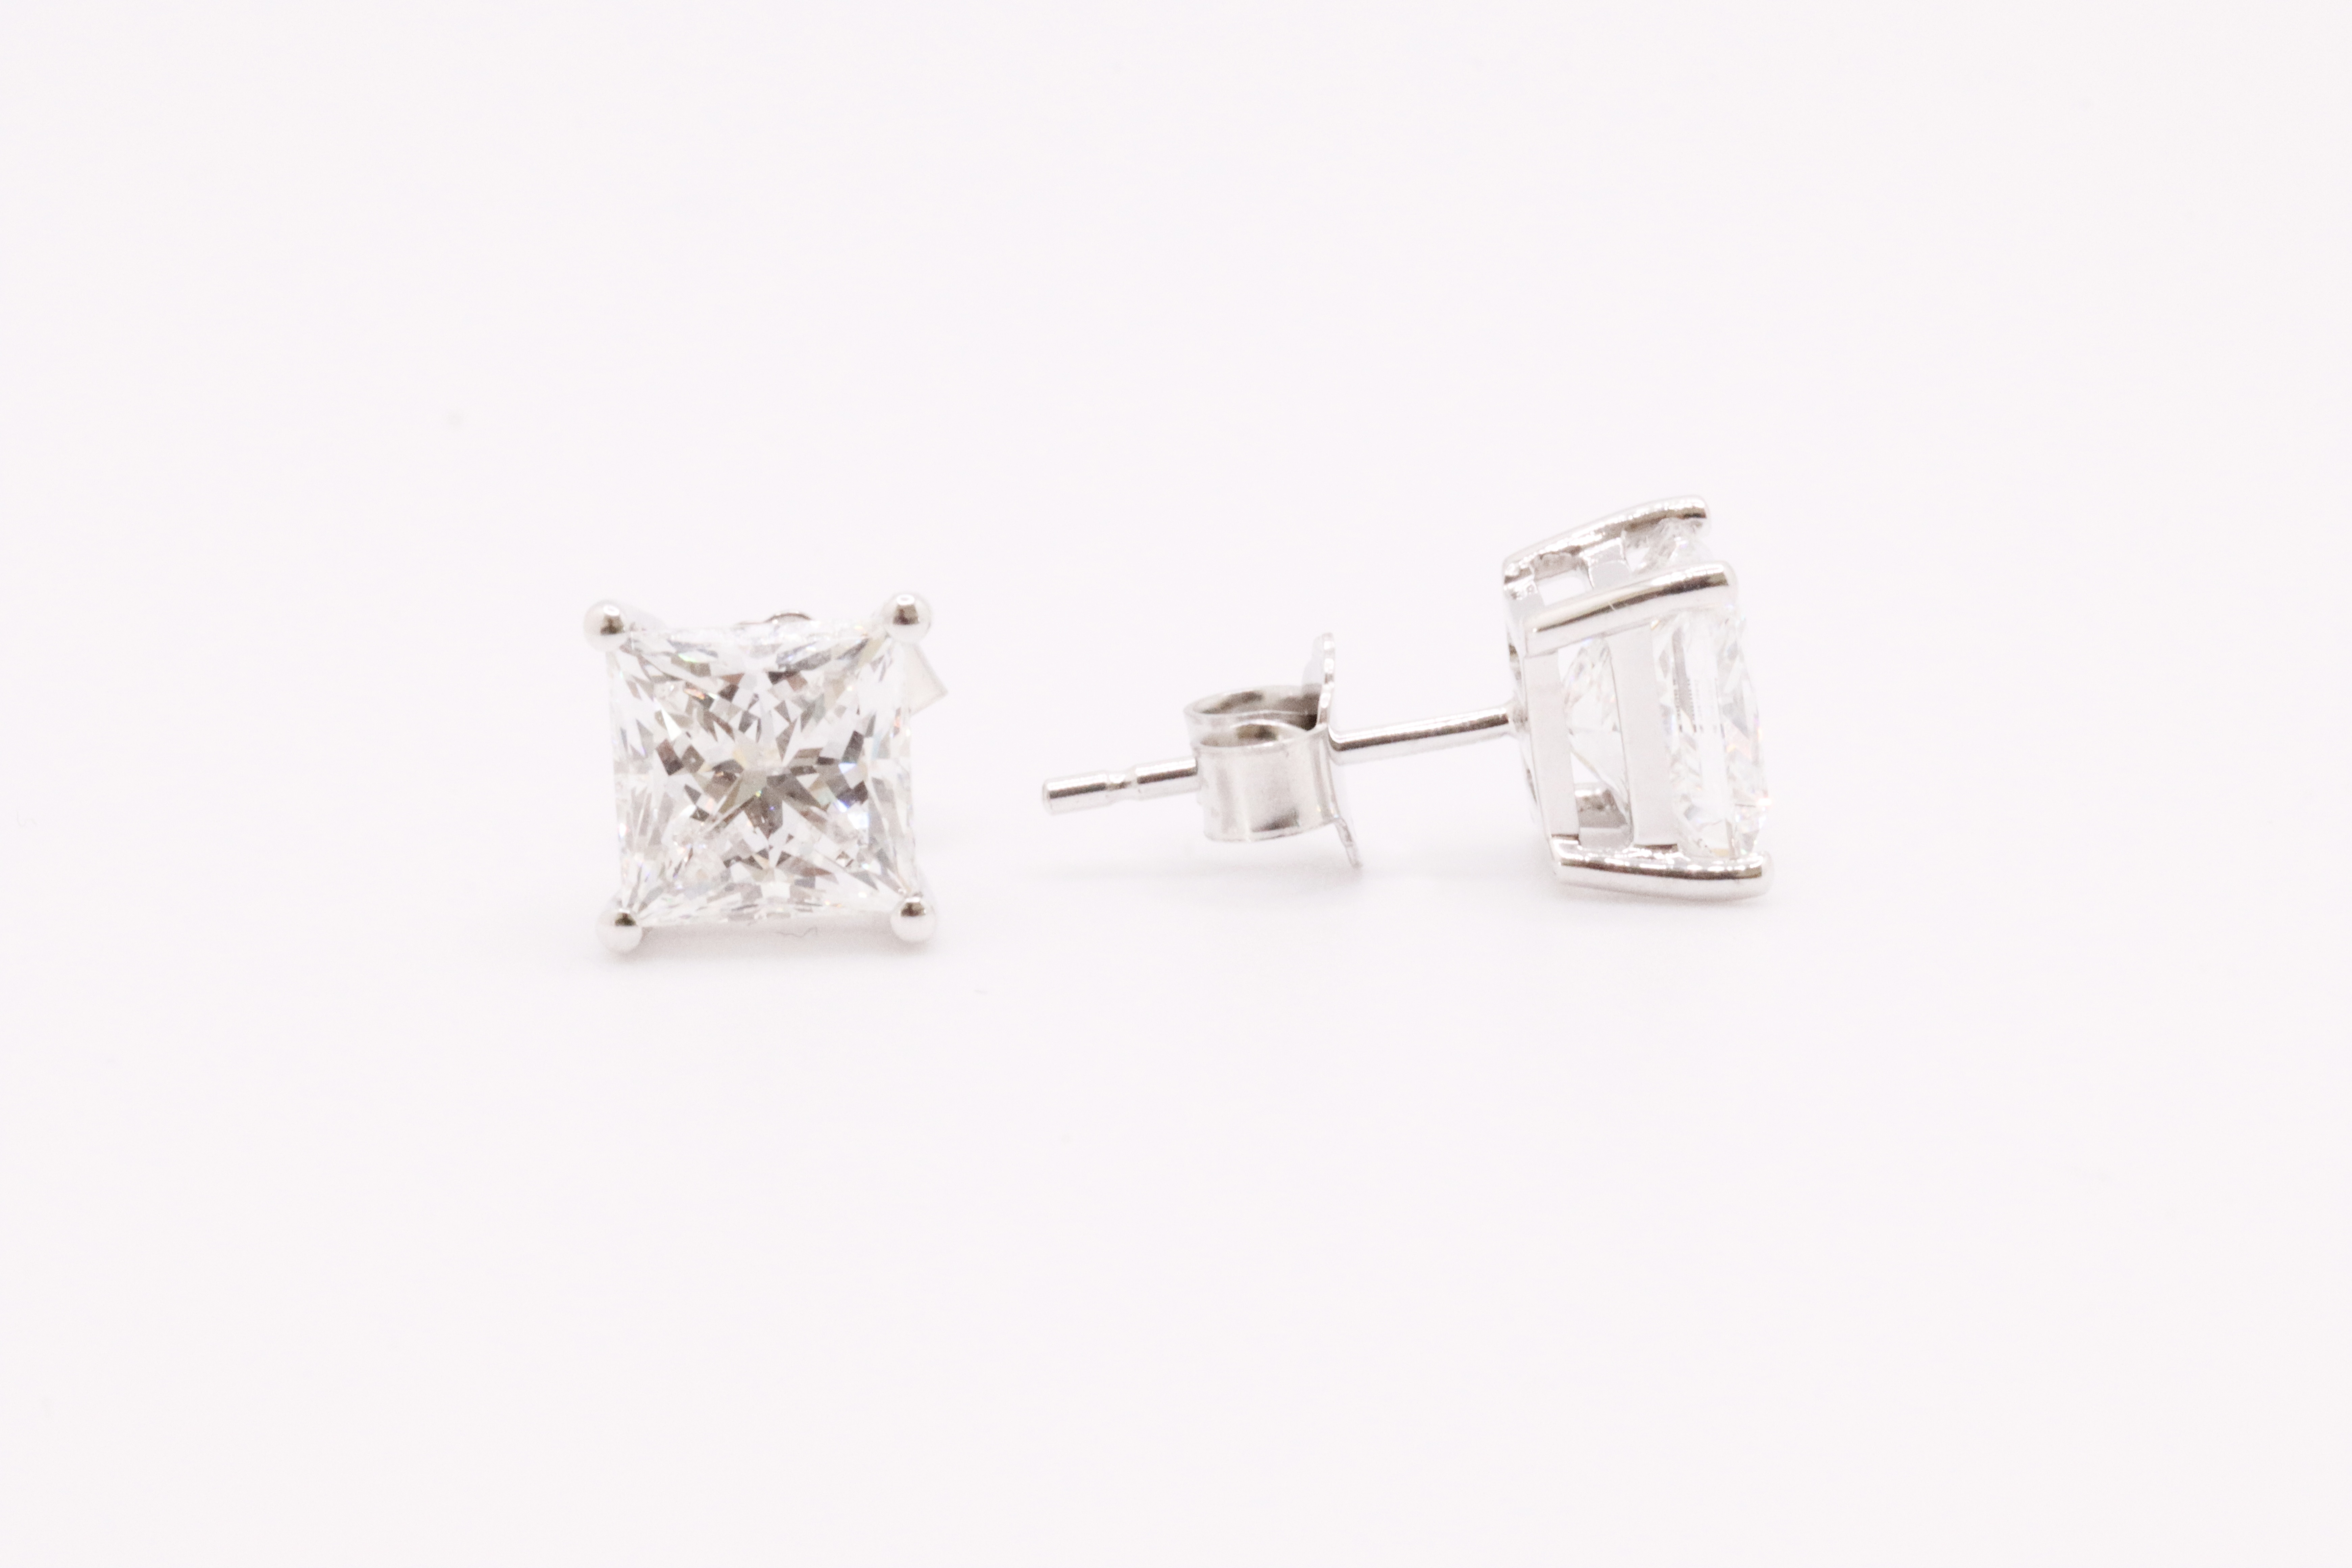 ** ON SALE ** Princess Cut 5.00 Carat Diamond Earrings Set in 18kt White Gold - F Colour SI Clarity - Image 4 of 5